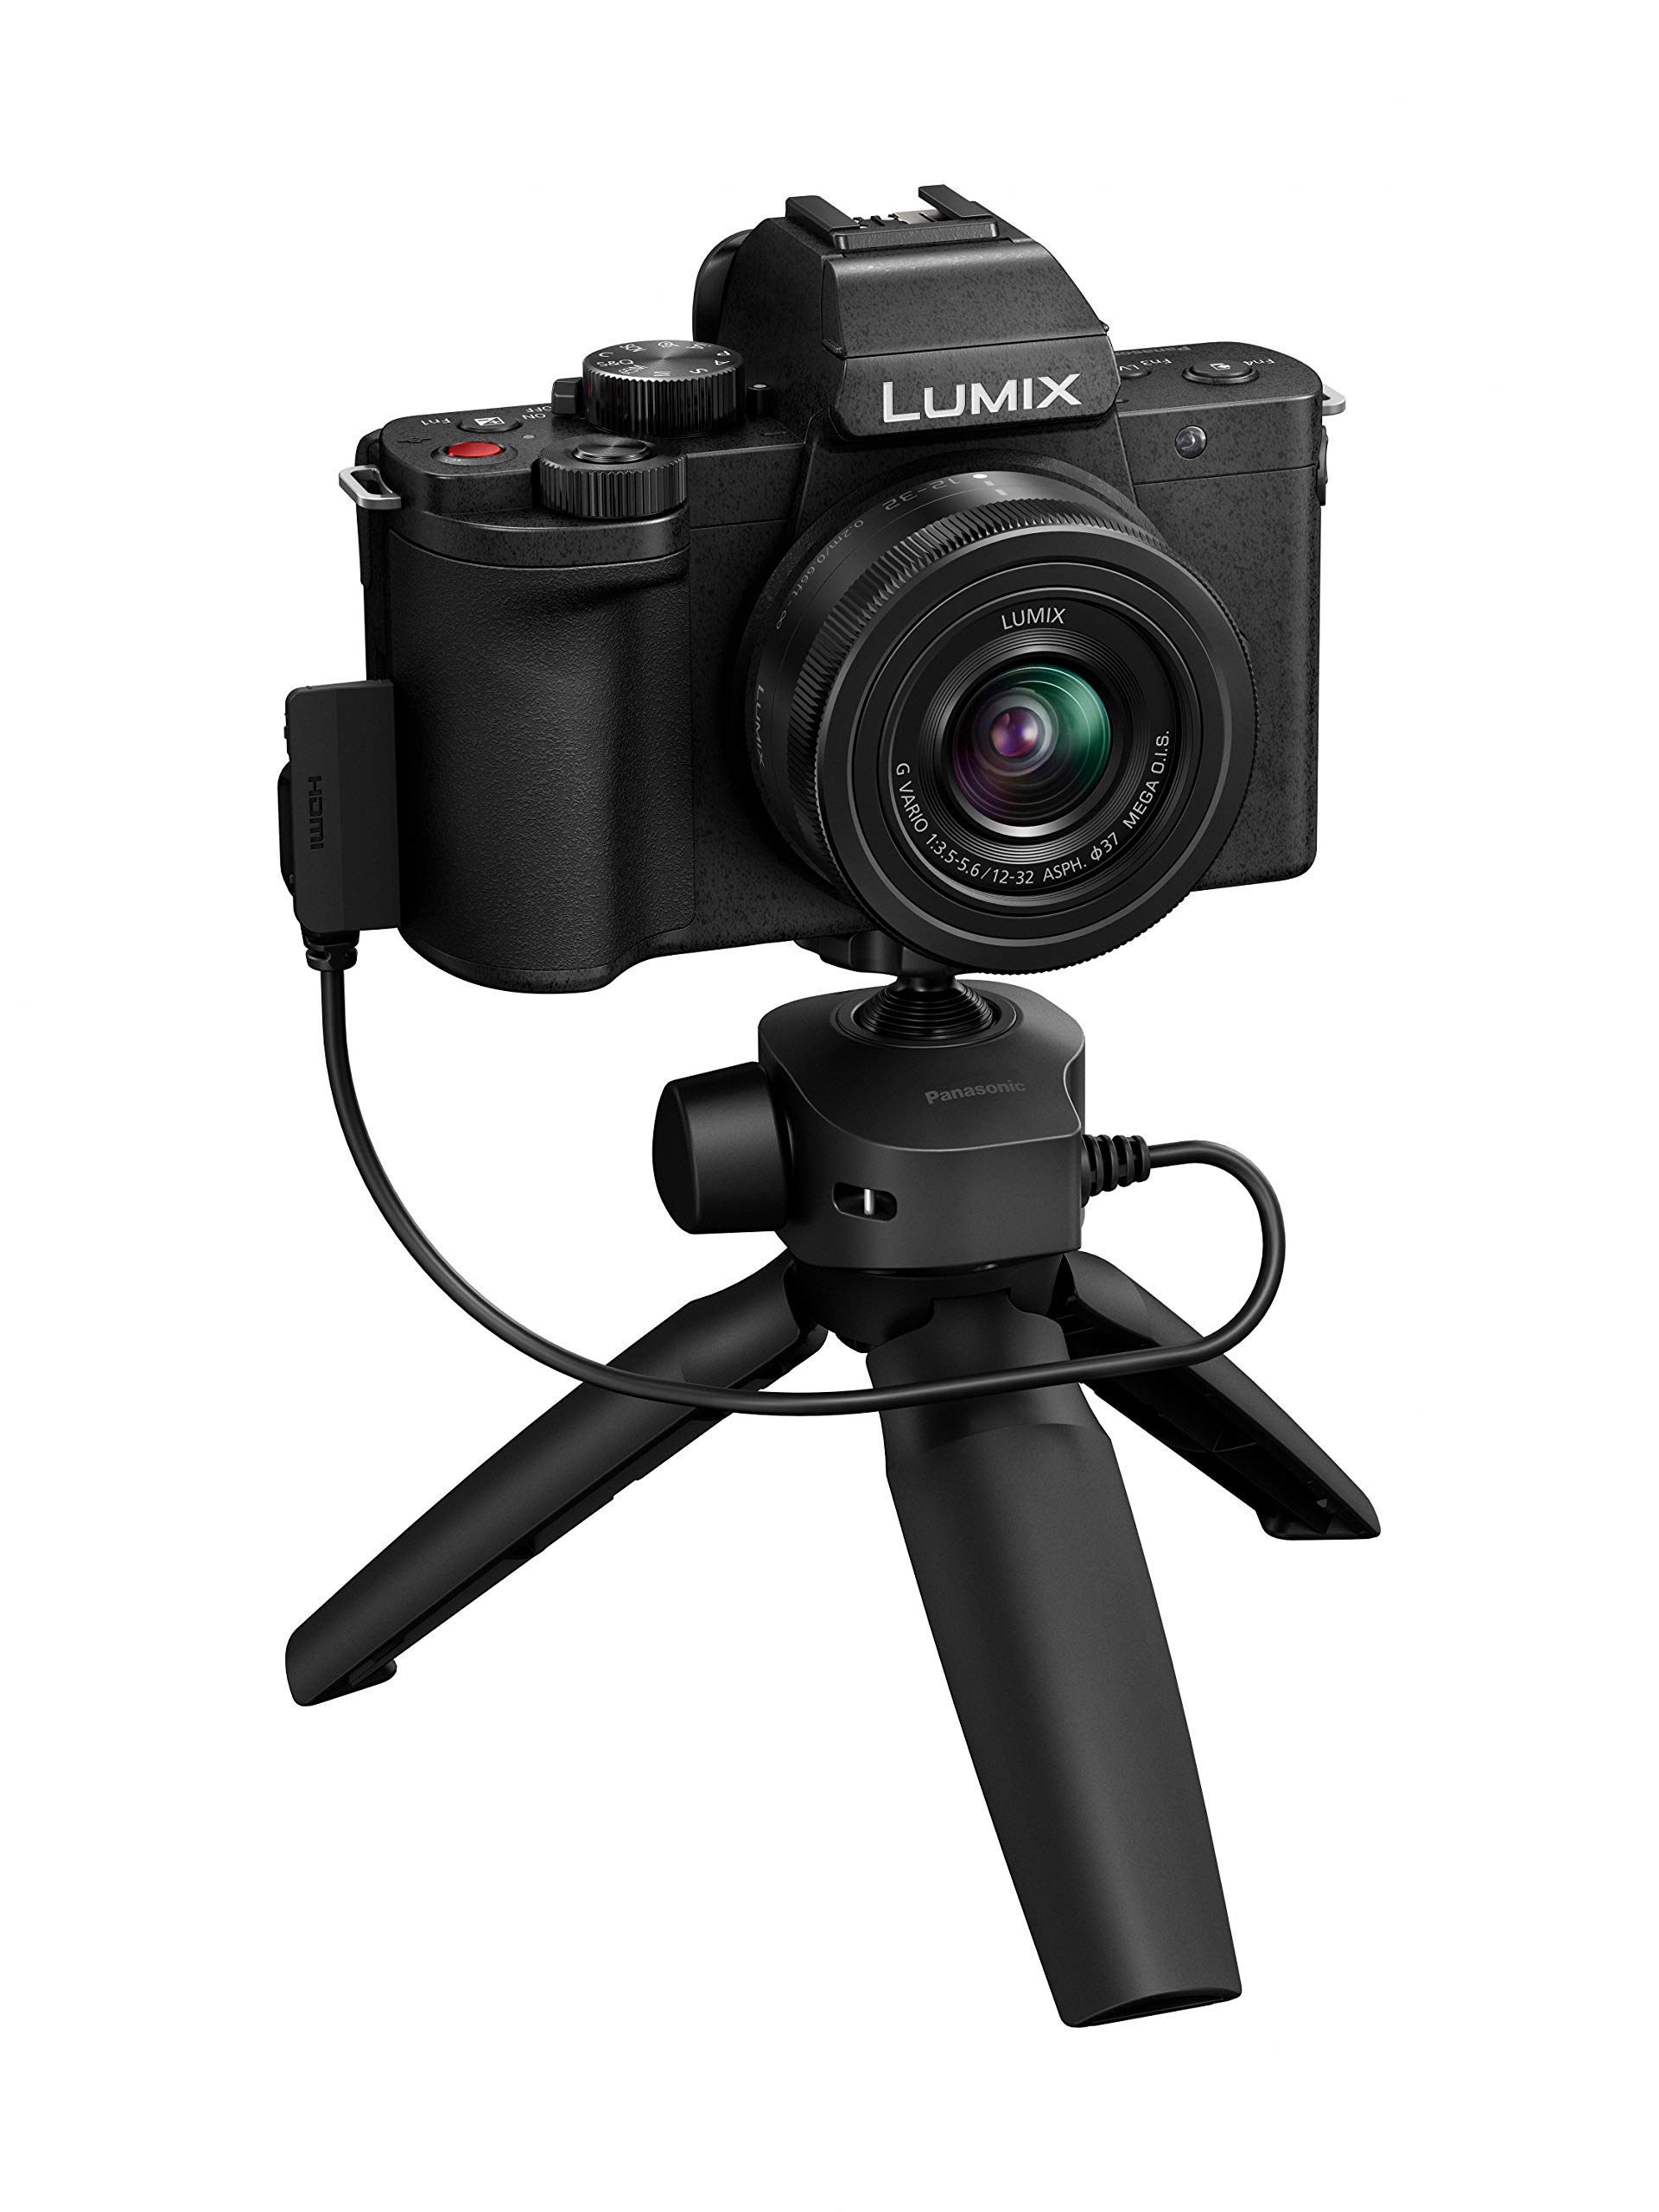 Panasonic LUMIX G100 4k Mirrorless Camera, Lightweight Camera for Photo and Video, Built-in Microphone, Micro Four Thirds with 12-32mm Lens, 5-Axis Hybrid I.S., 4K 24p 30p Video, DC-G100VK (Black)